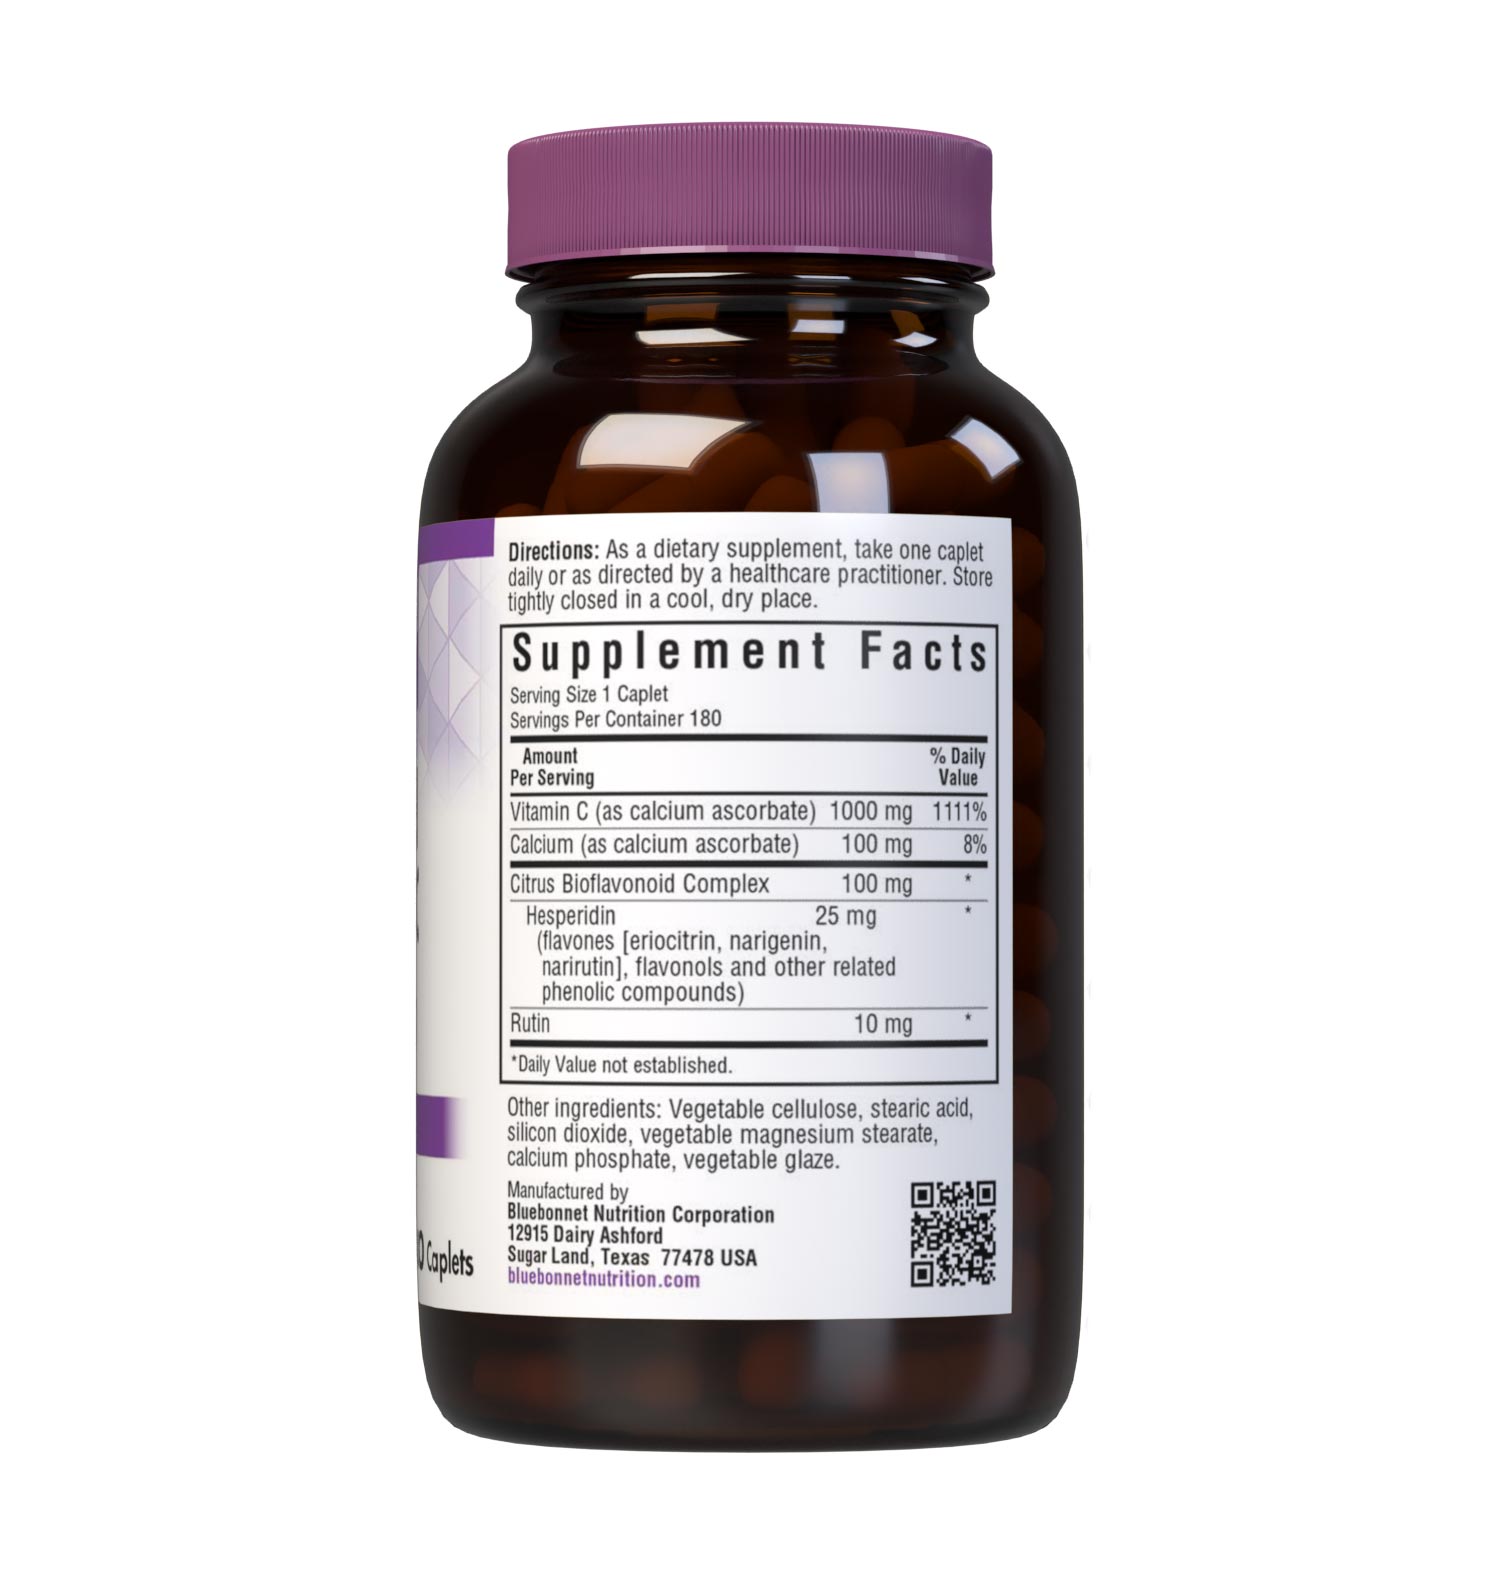 Bluebonnet Nutrition's BUFFERED VITAMIN C-1000 mg 180 caplets is formulated with 1000 mg of identity-preserved (IP) Buffered Vitamin C & Citrus Bioflavonoids and Rutin. Supplement facts panel. #size_180 count